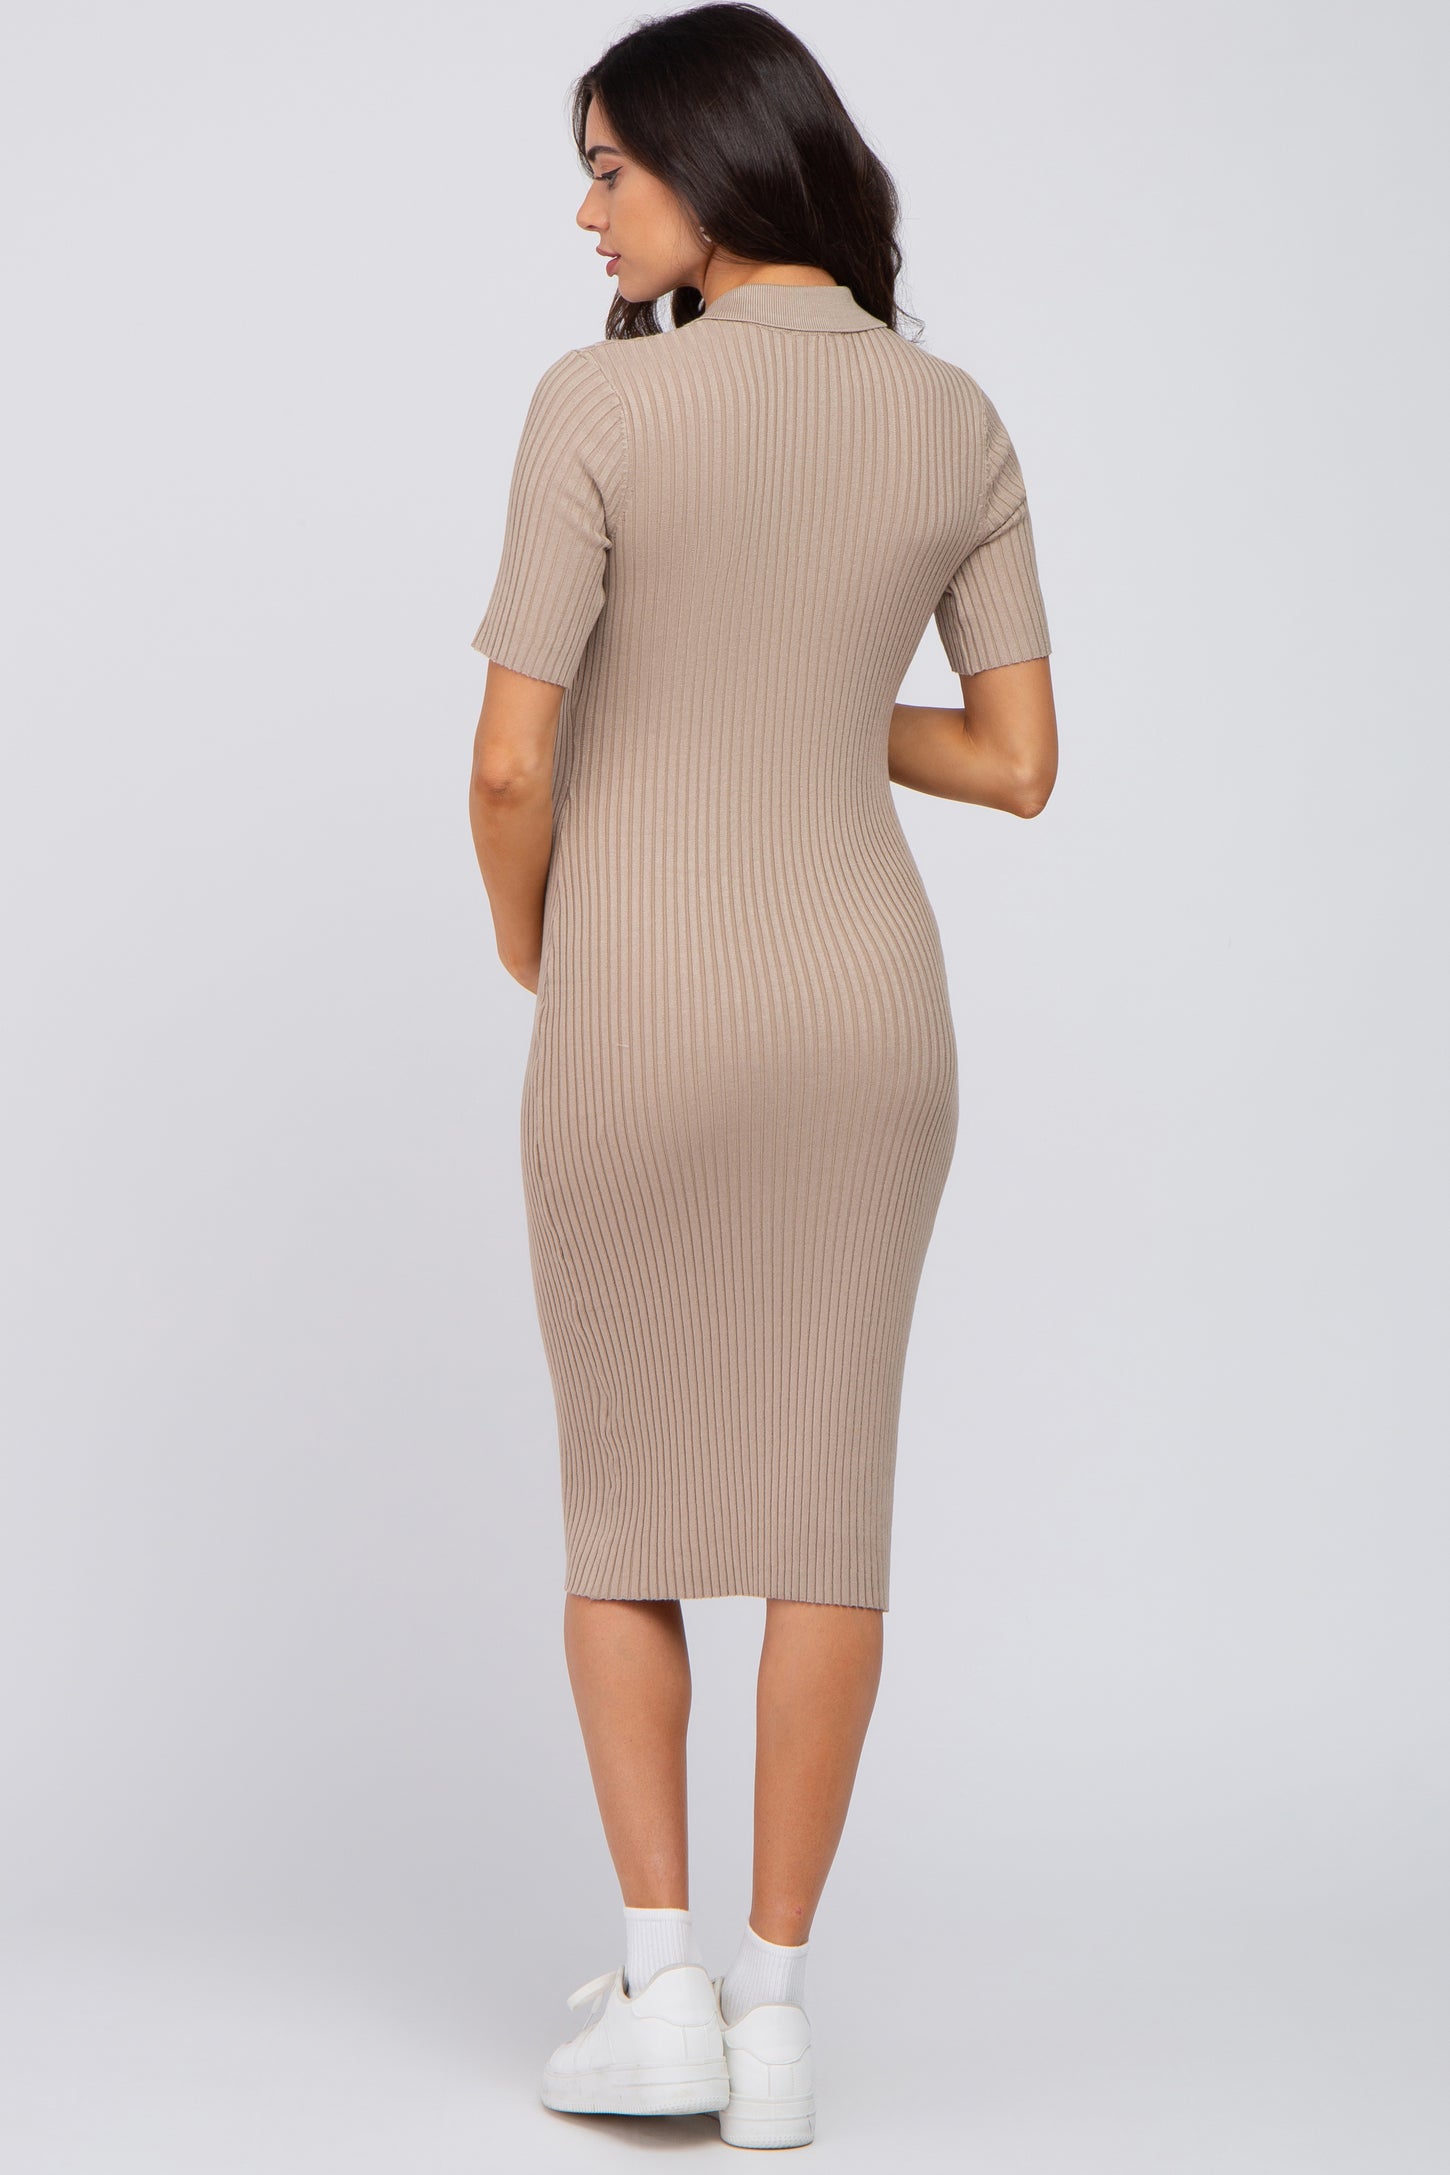 Beige Ribbed Fitted Collared Maternity Dress– PinkBlush